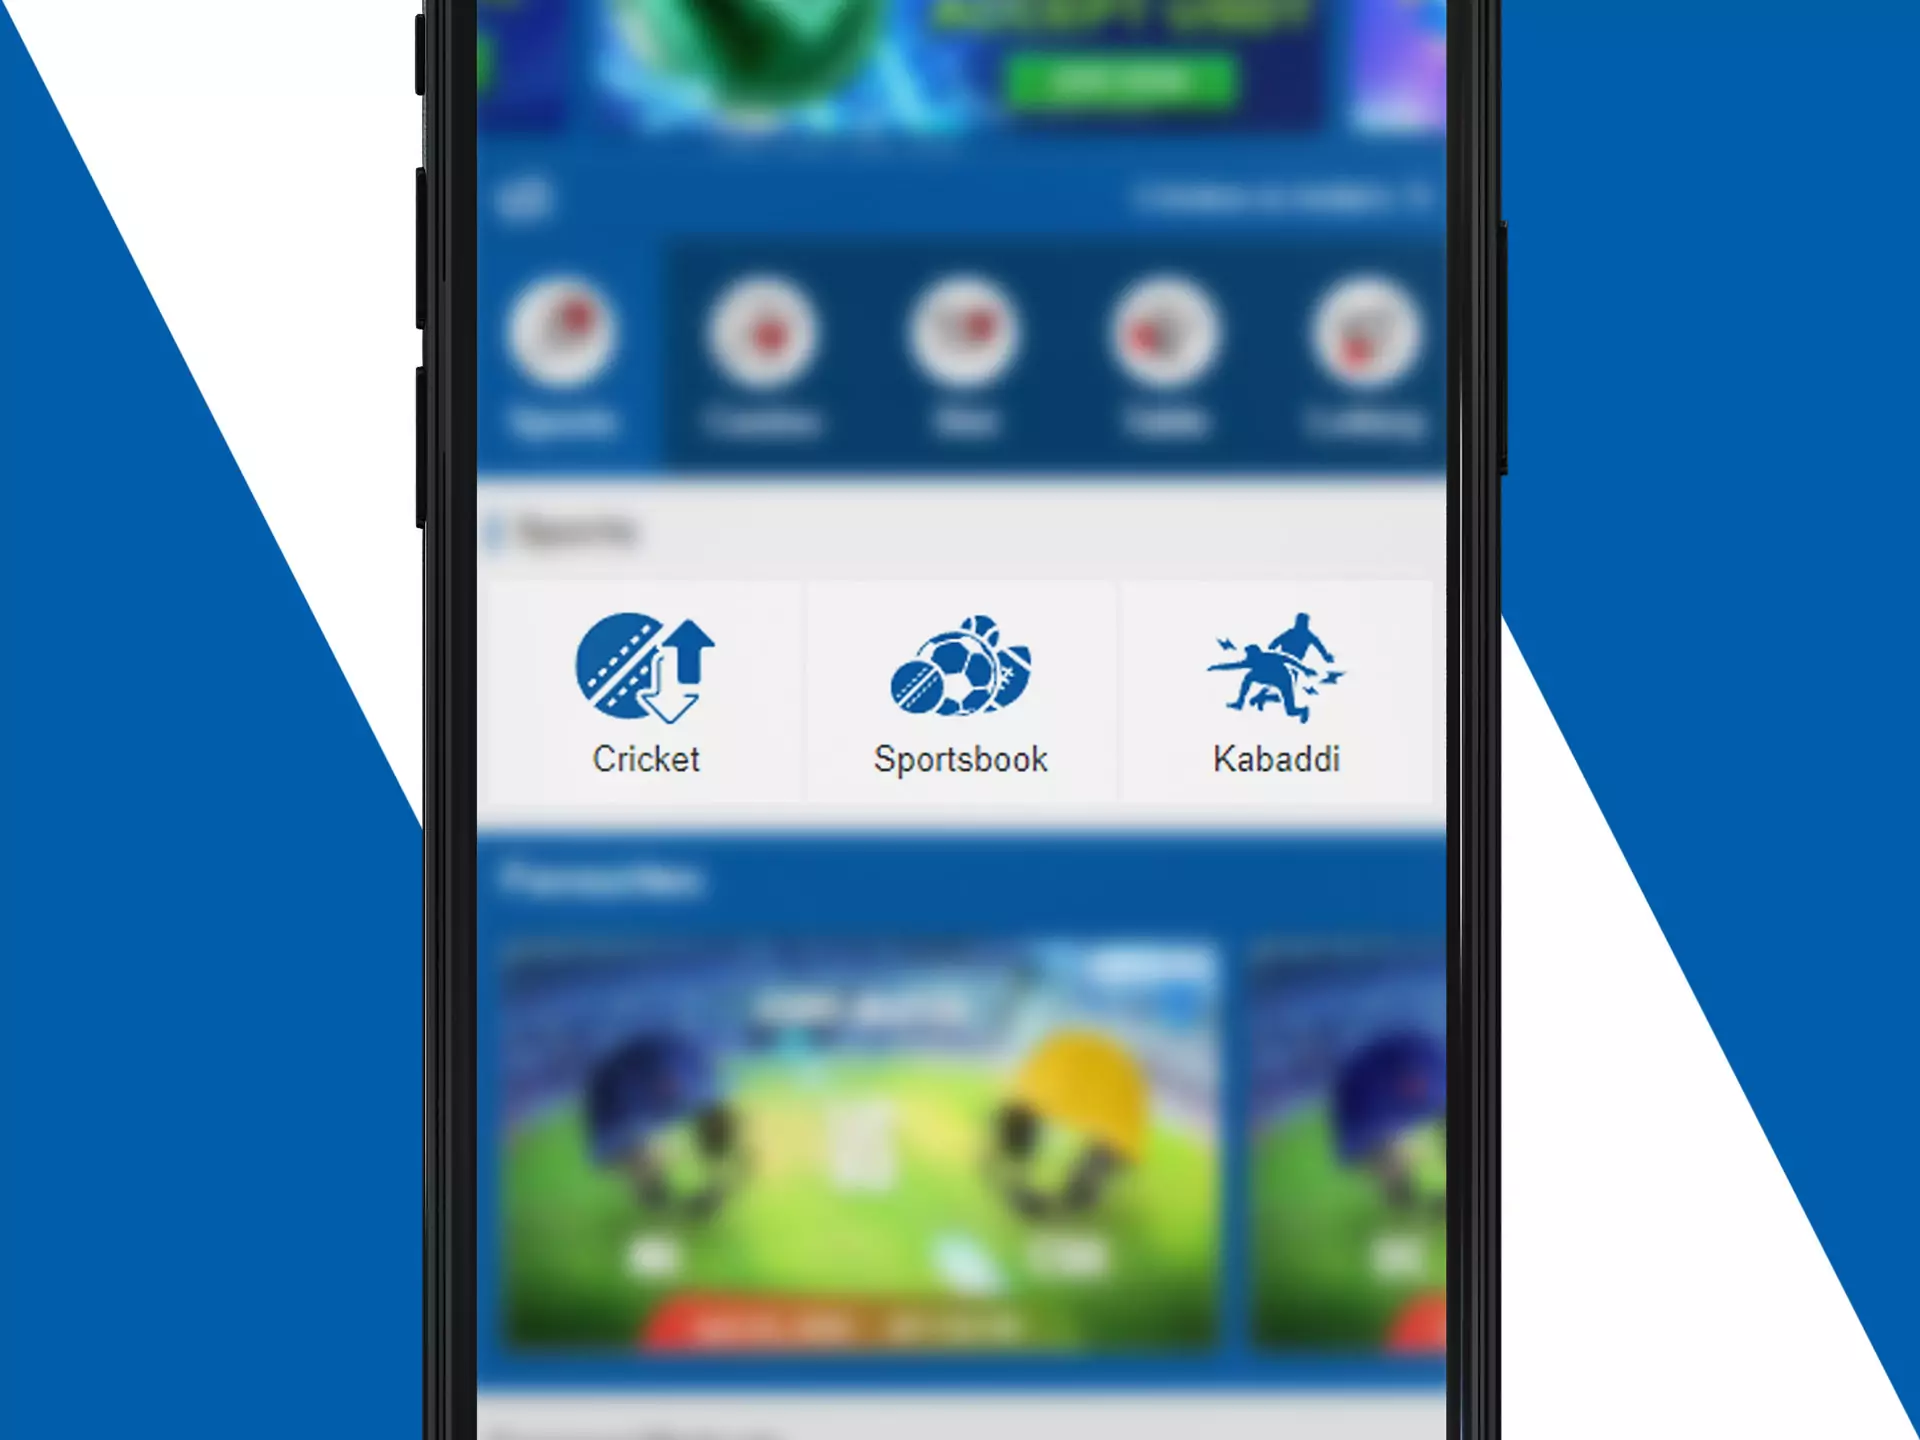 The Crickex app supports online sports betting.